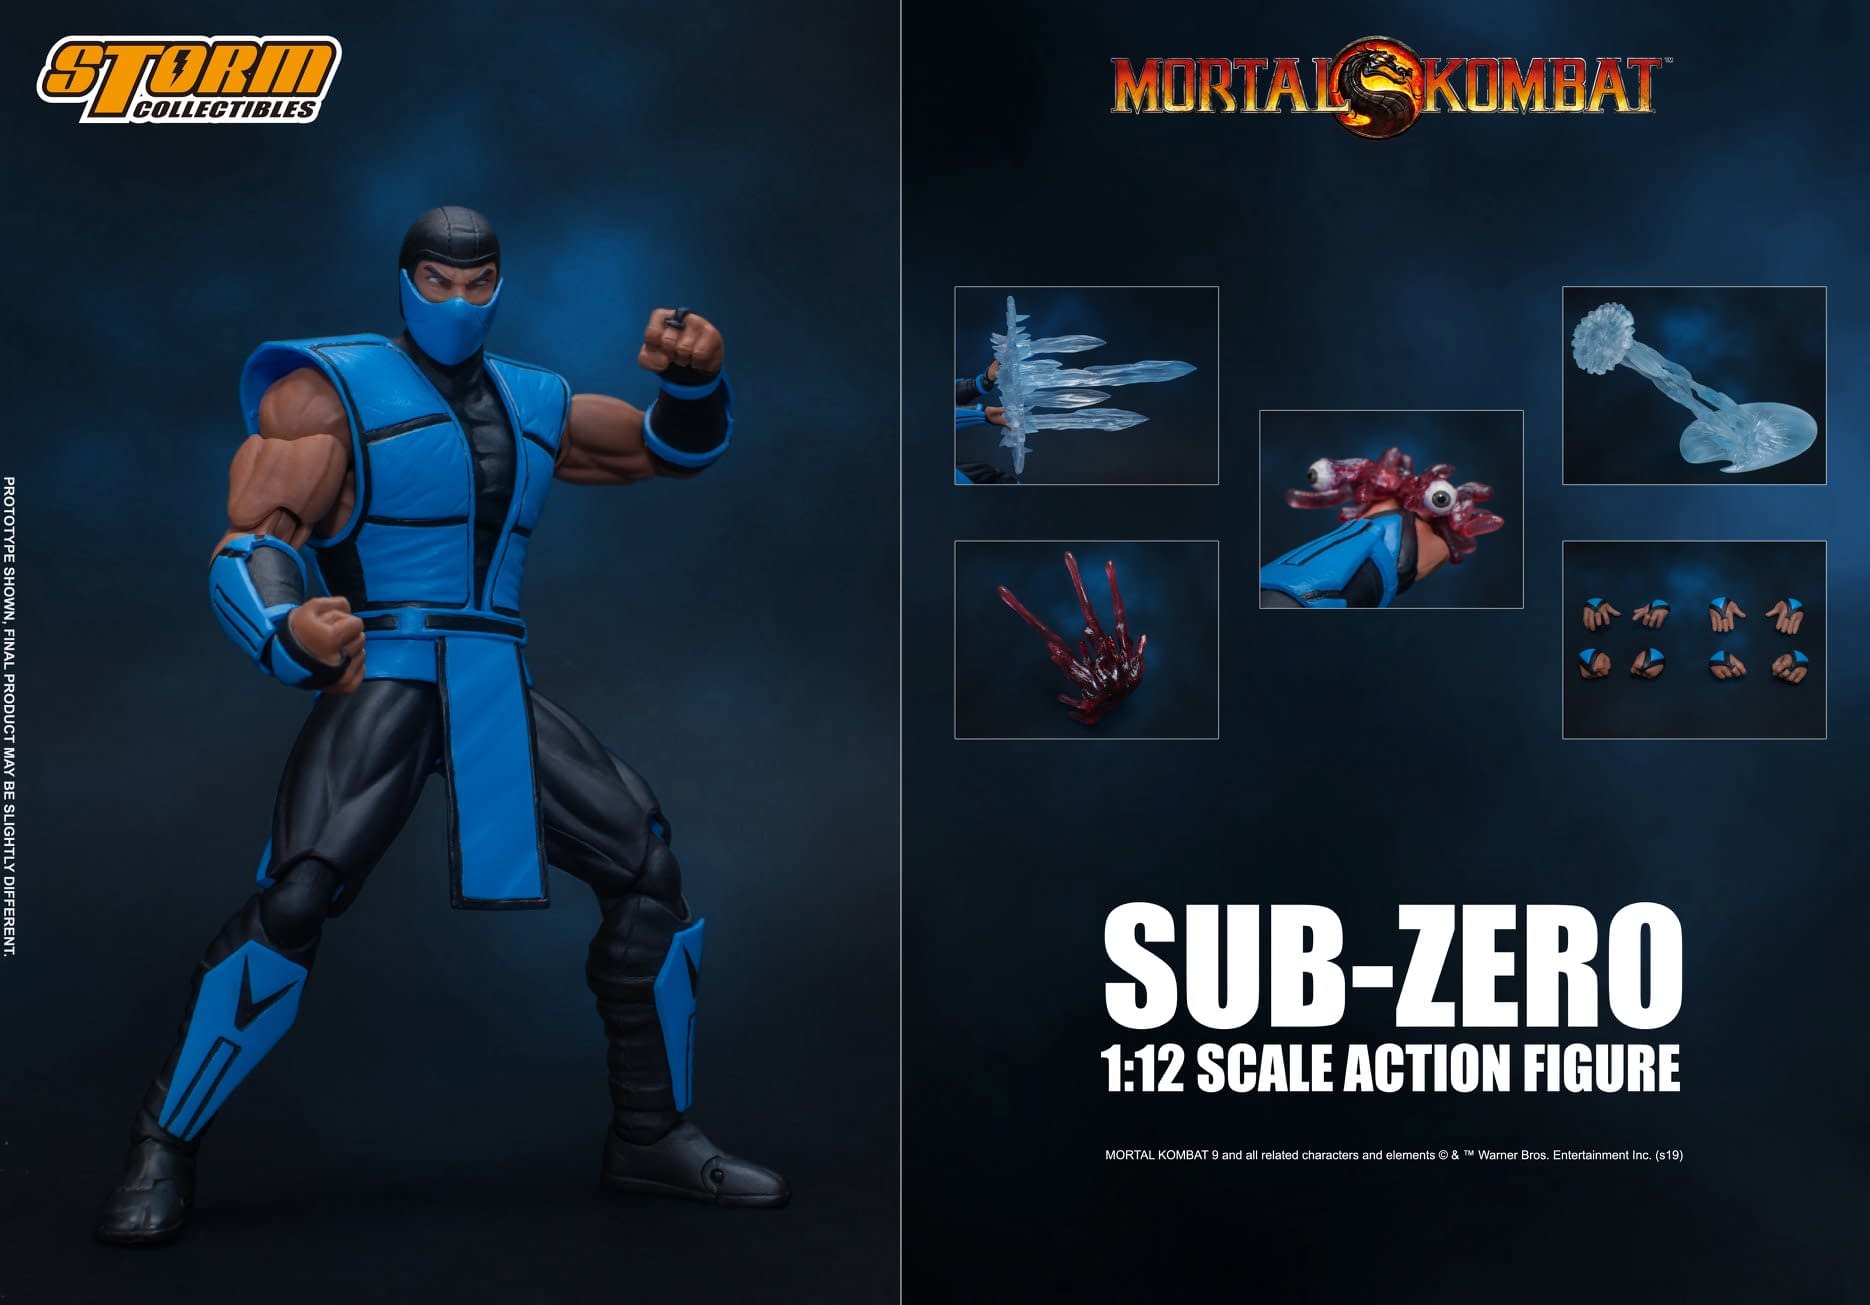 Subzero Brings a Blizzard with New Storm Collectibles Figure